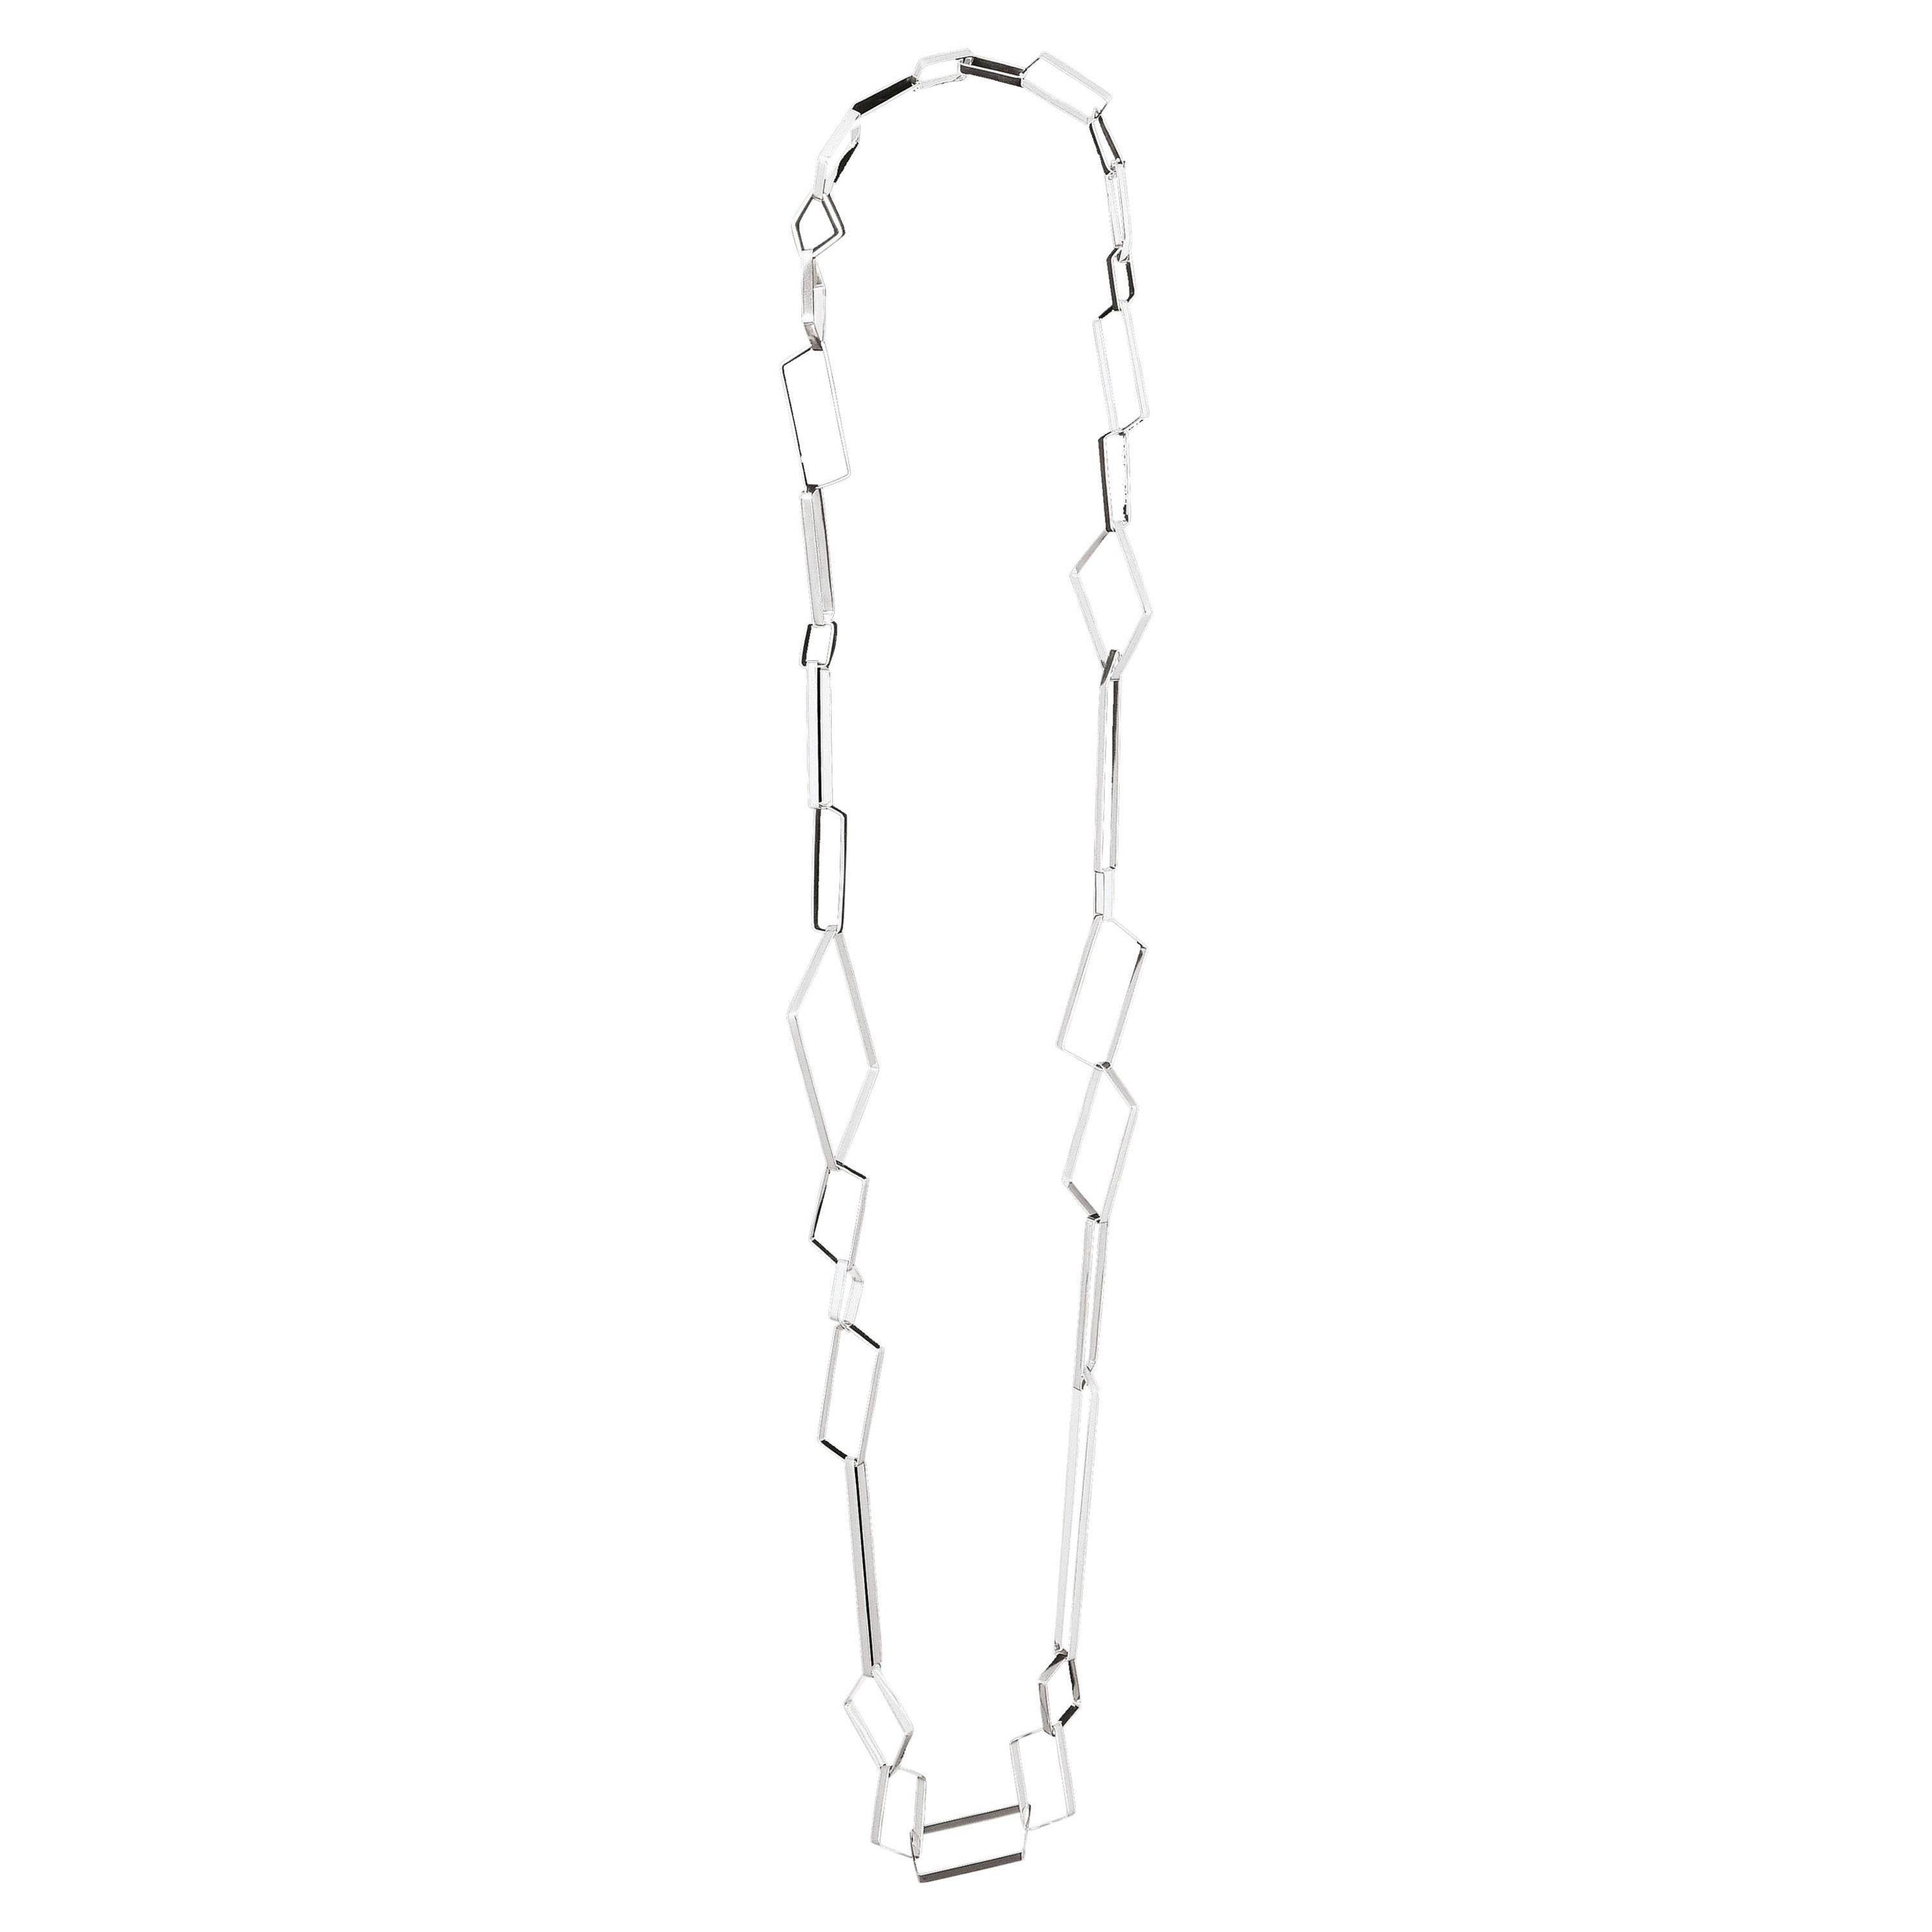 Nathalie Jean Contemporary Sterling Silver Limited Edition Link Chain Necklace